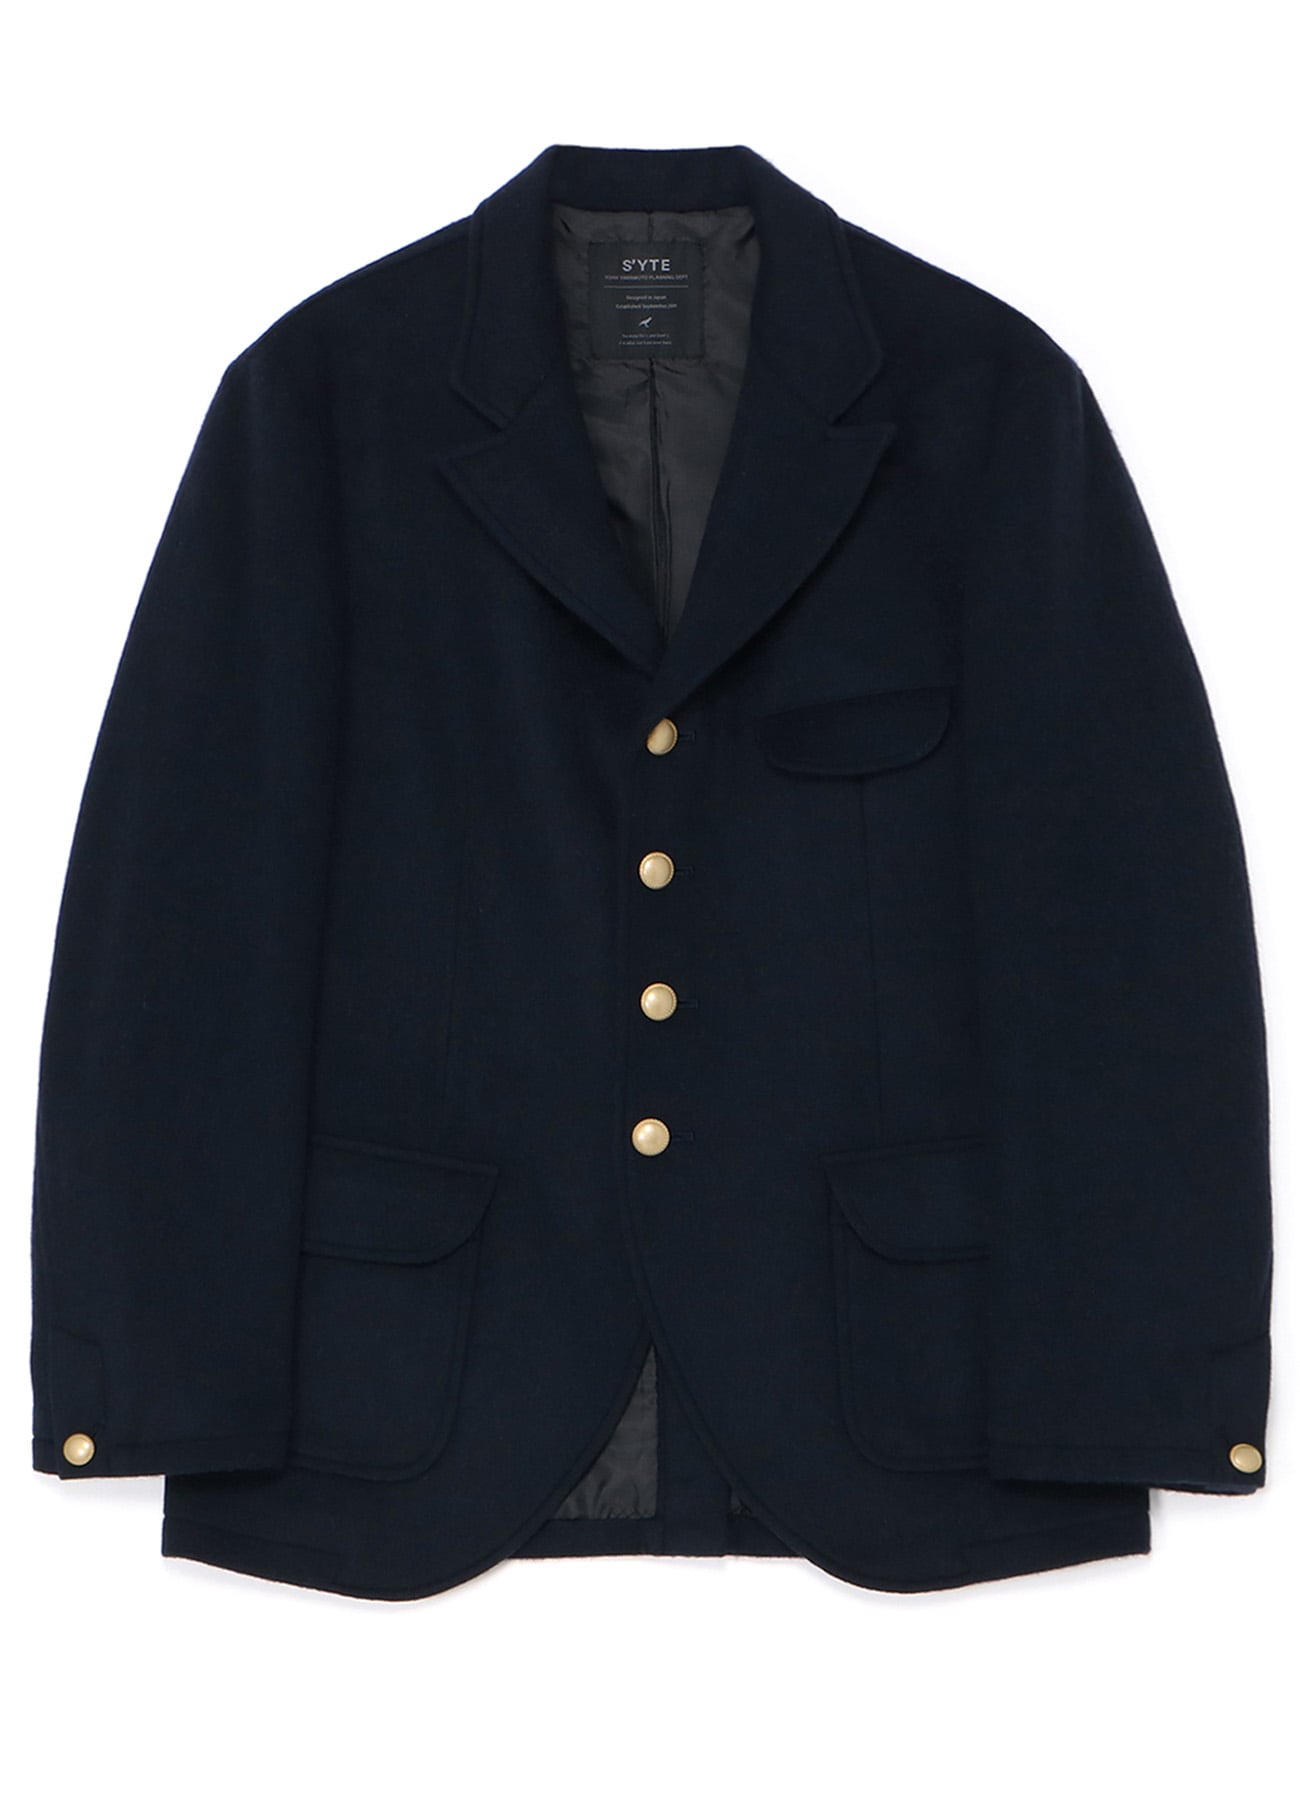 WOOL BEAVER PEAKED LAPEL 4-BUTTON JACKET(M Navy): S'YTE｜THE SHOP 